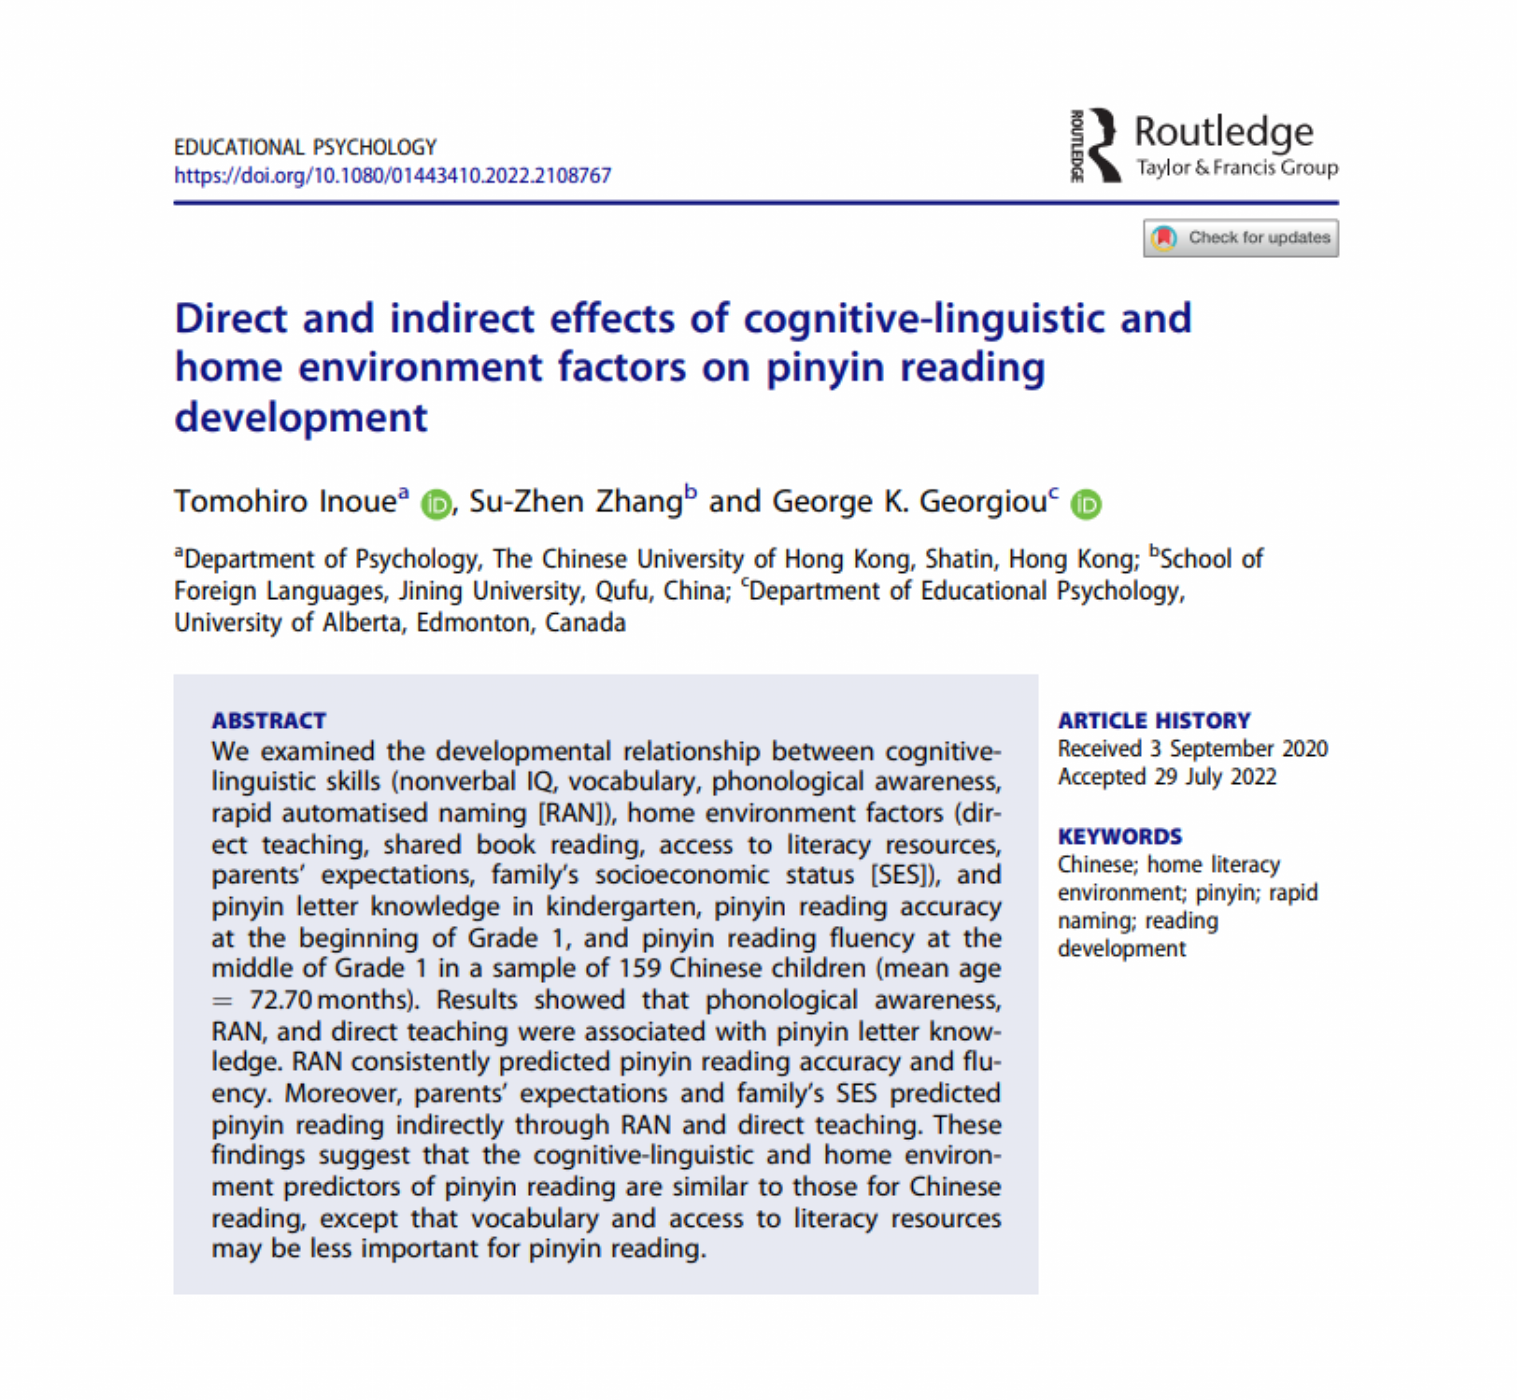 Effects of cognitive-linguistic and home environment factors on pinyin reading development